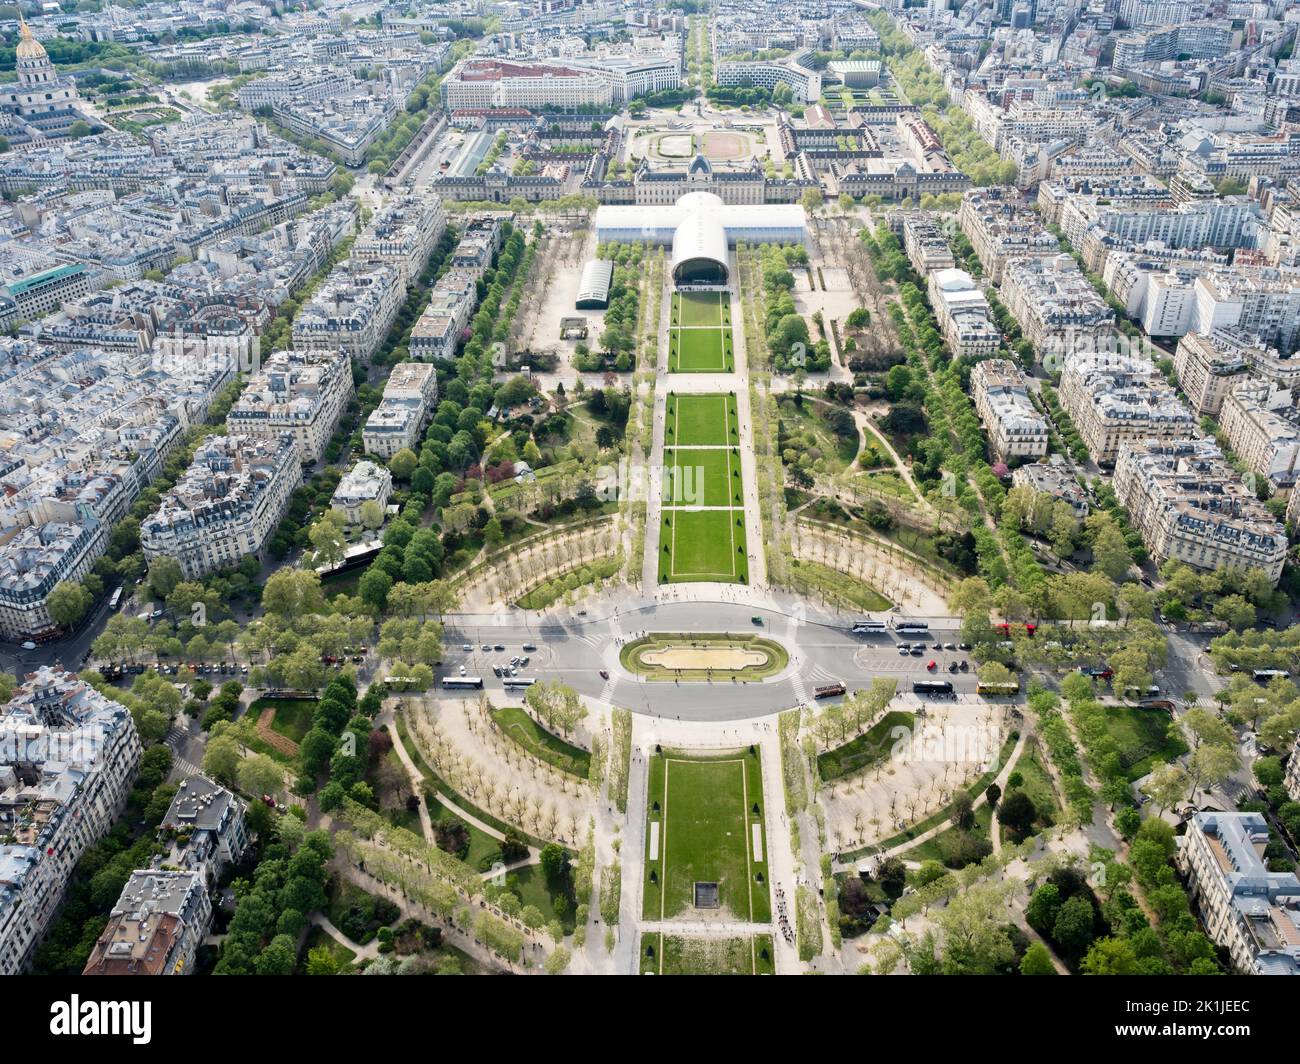 Paris, France - 18 April 2022: View from above to Champ de Mars, looking from Eiffel Tower towards southeast direction to the École Militaire. Stock Photo